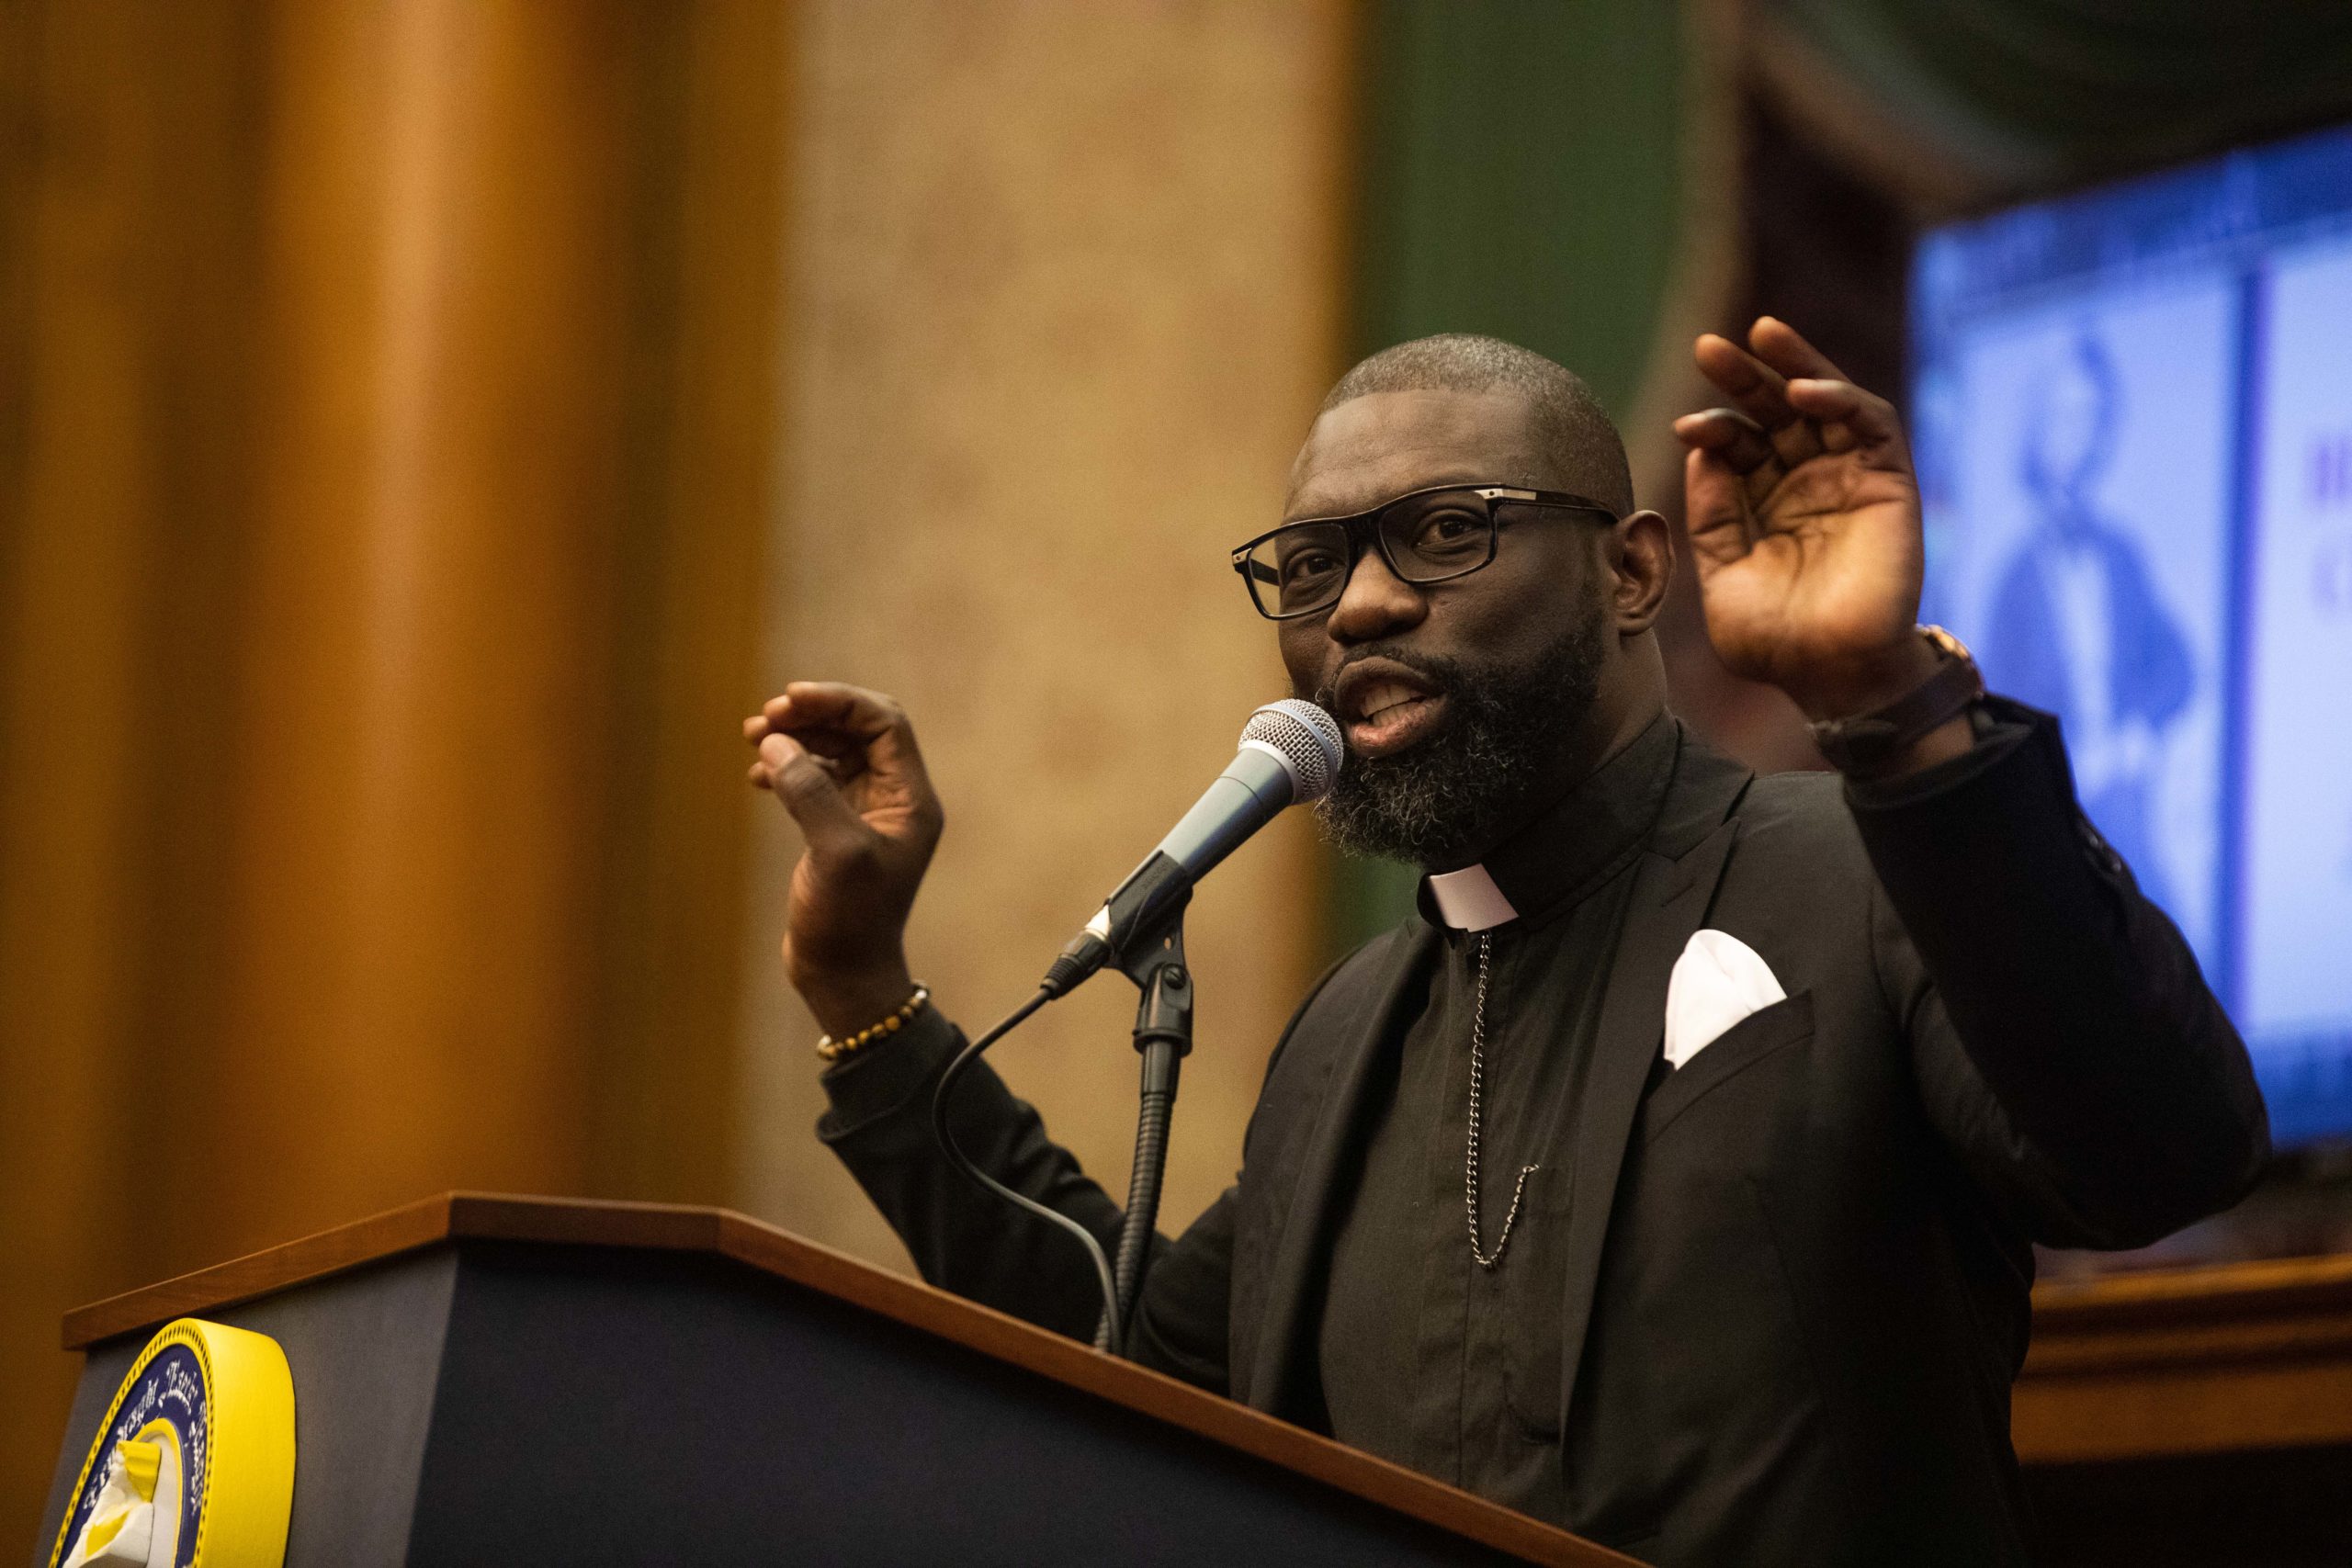 Rev. Dr. Dave Allen of Bethel Tabernacle AME Church speaks to a crowd of local clergy members at a Black History Month event at Brooklyn Borough Hall on Feb. 27, 2020. Photo: Paul Frangipane/Brooklyn Eagle